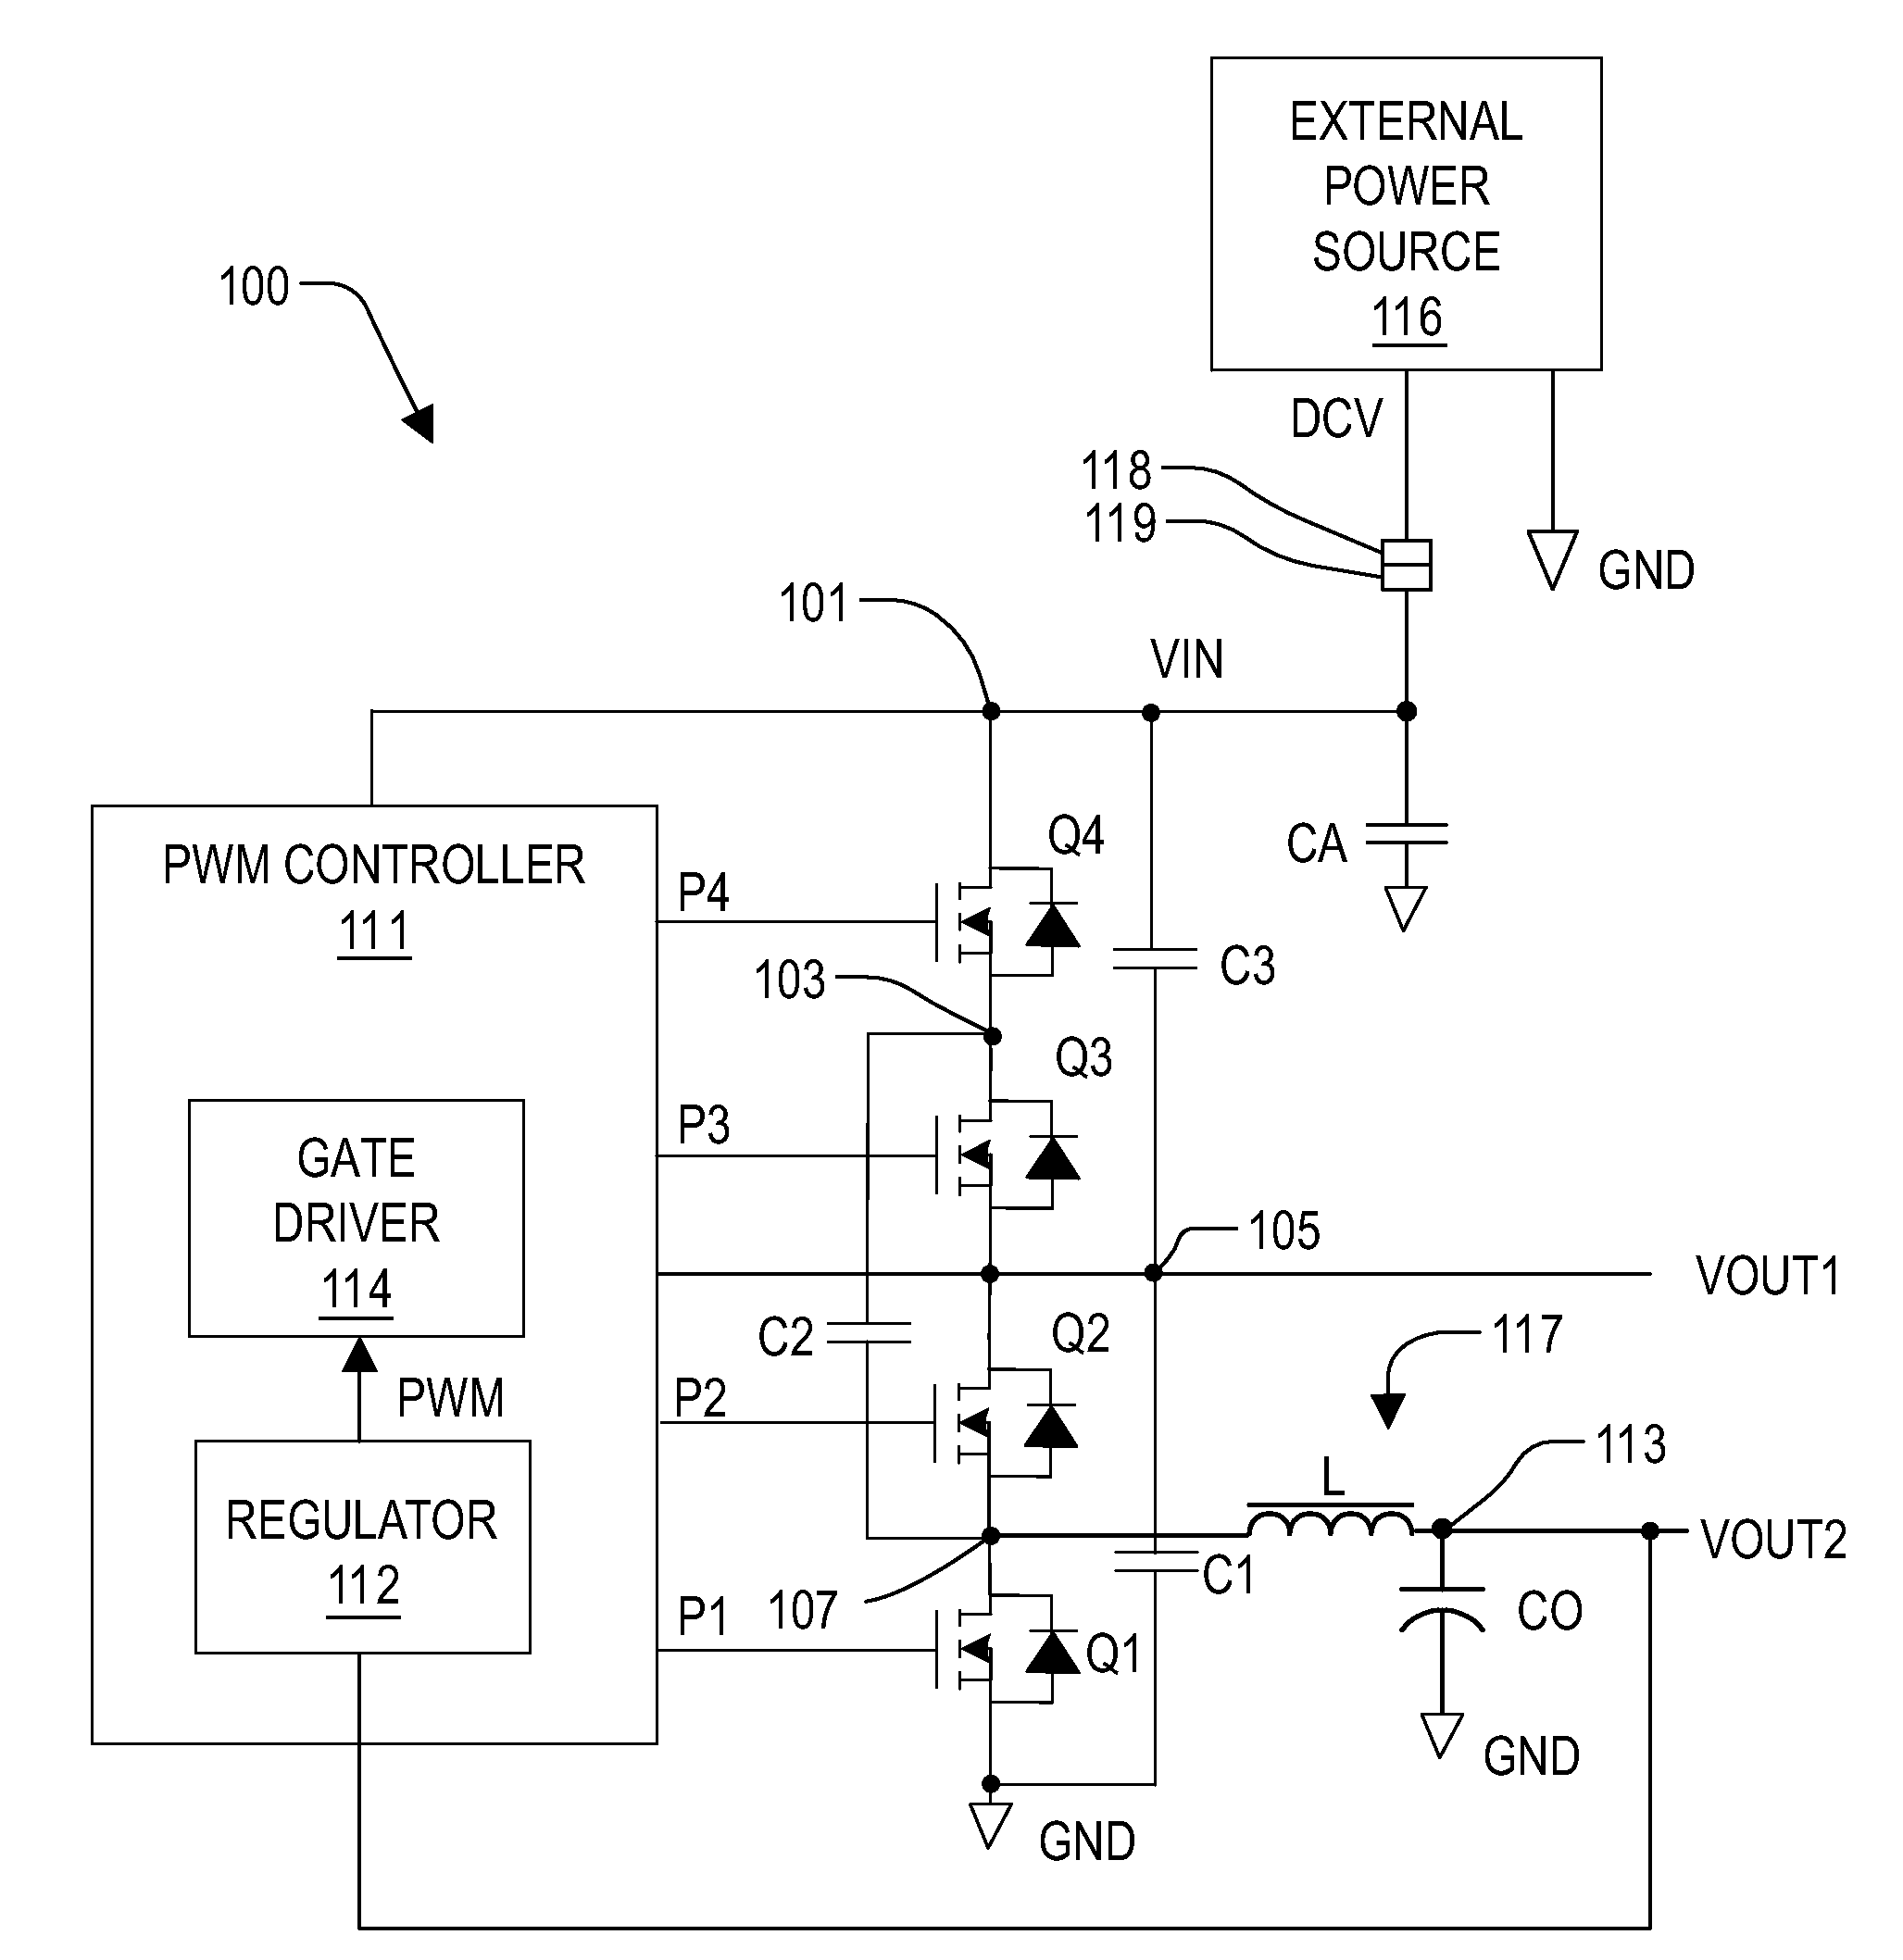 Voltage converter with combined capacitive voltage divider, buck converter and battery charger